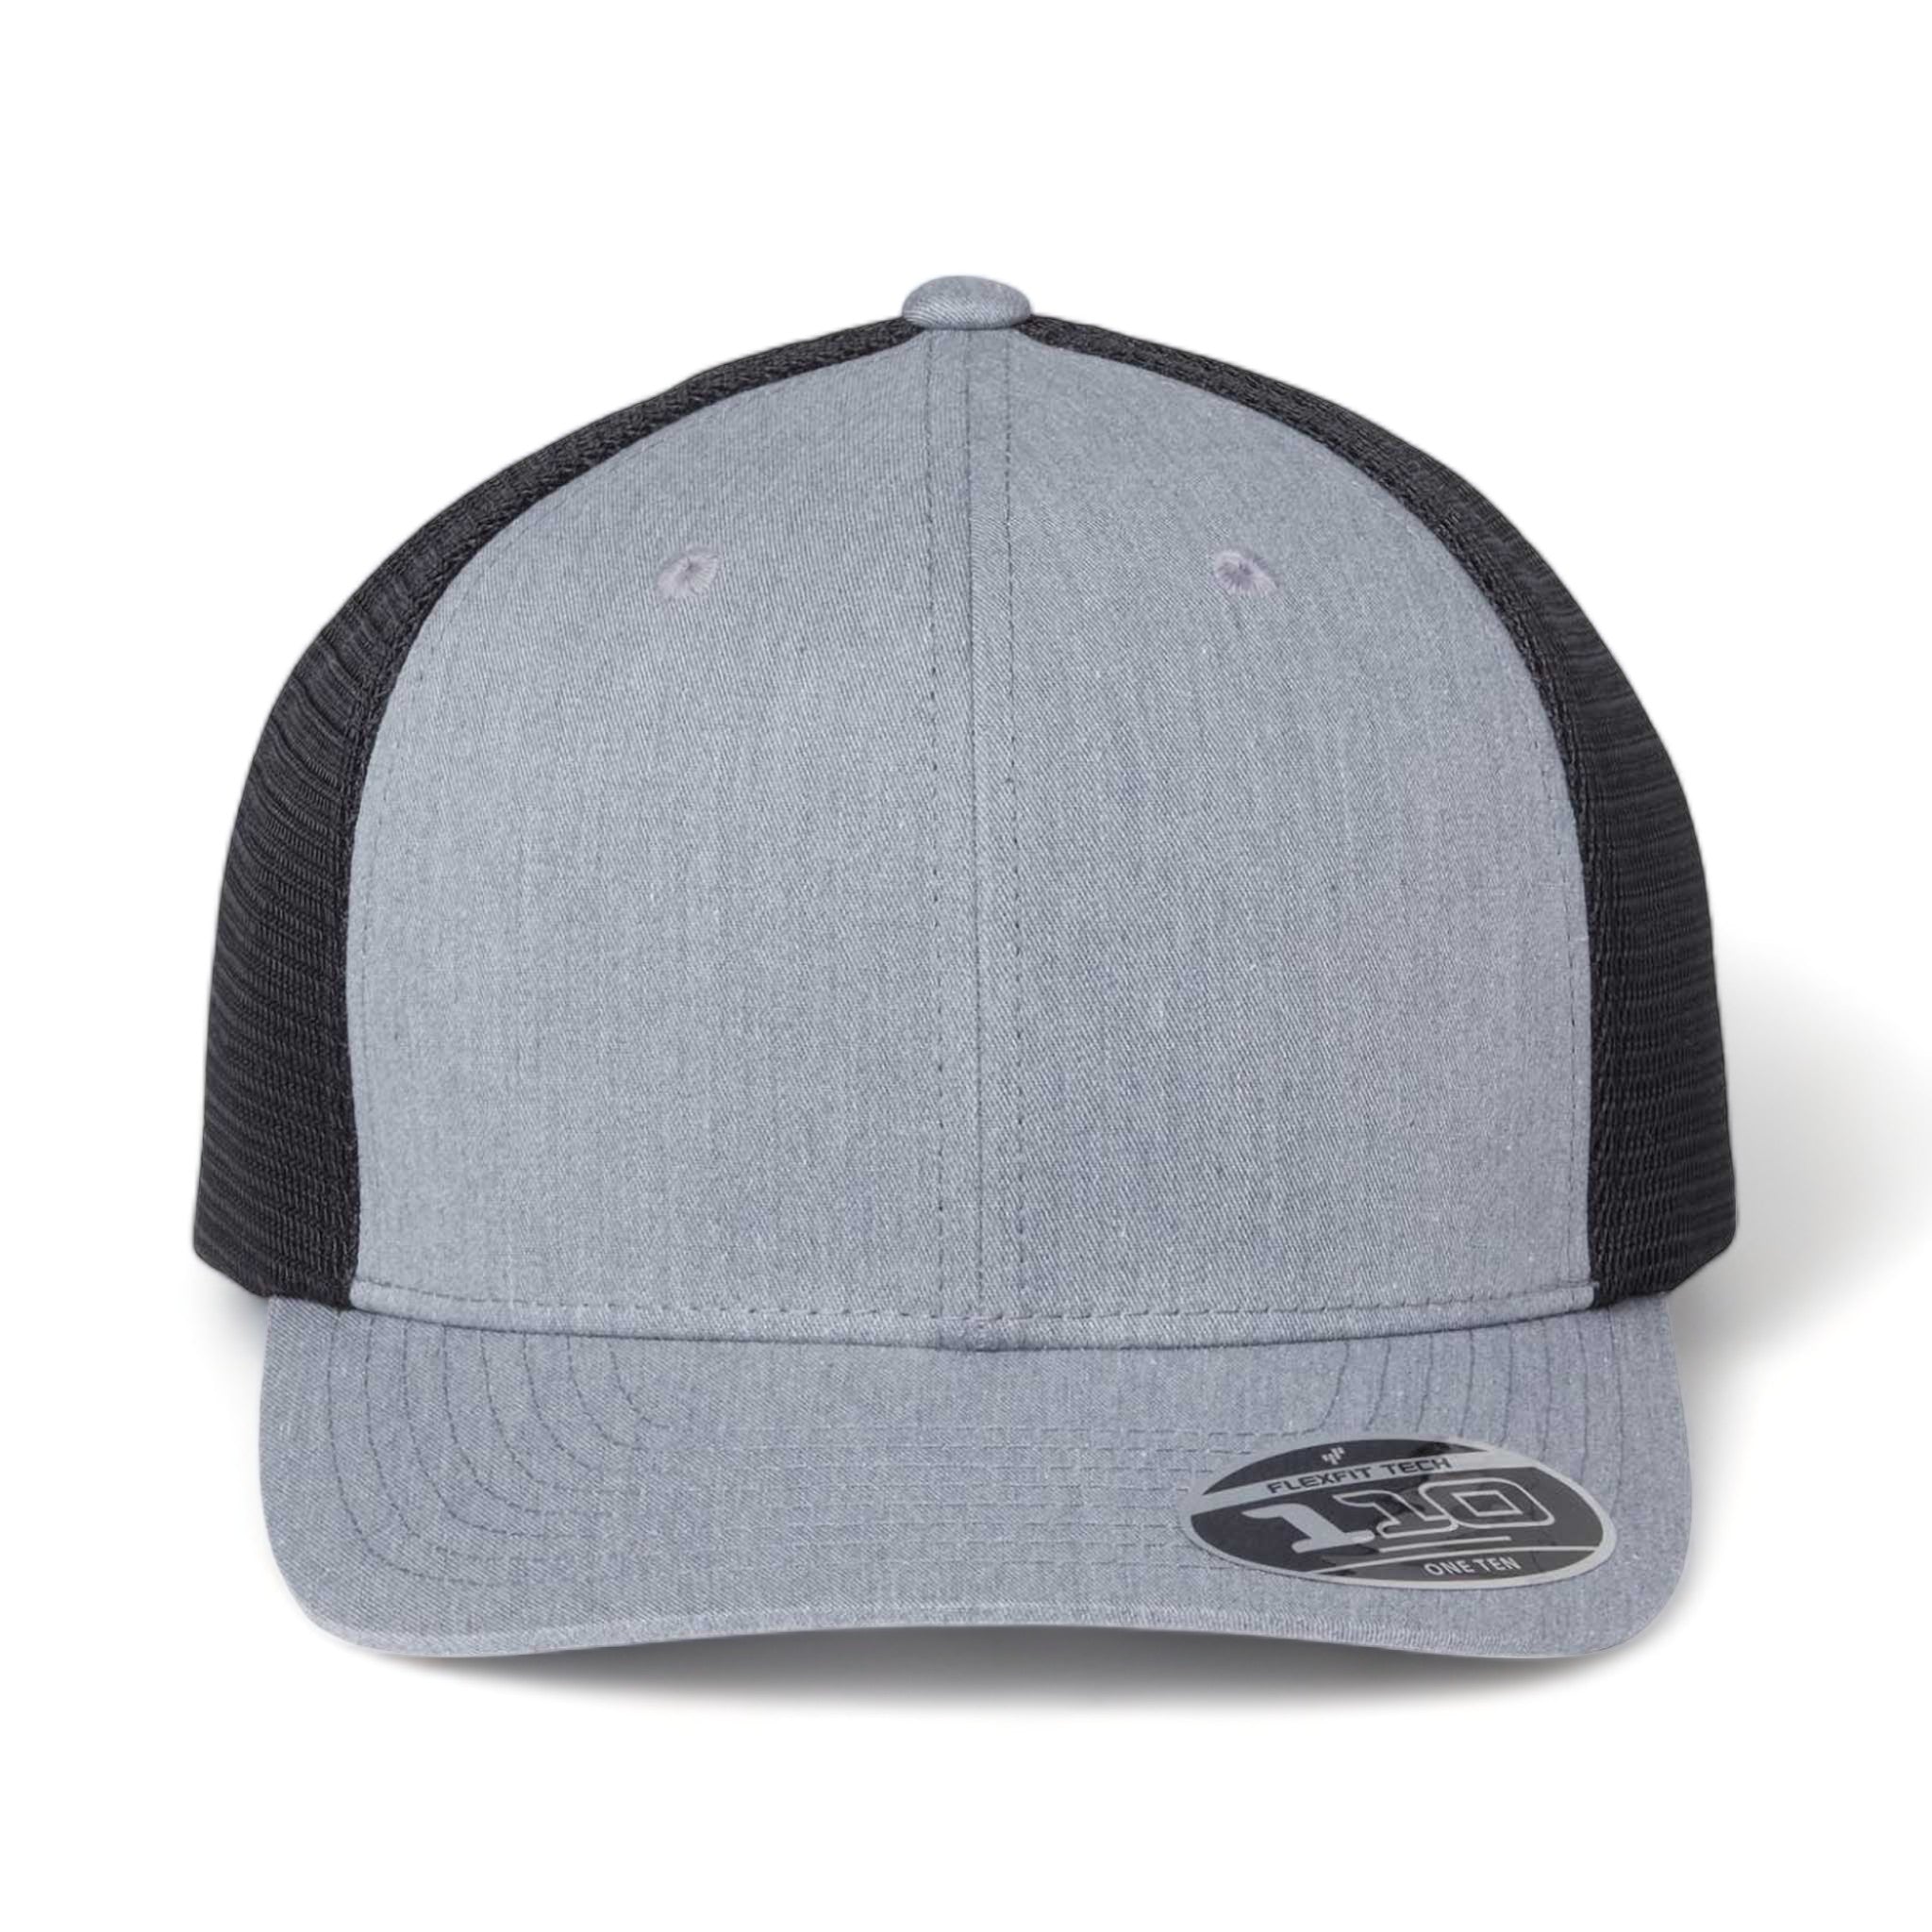 Front view of Flexfit 110M custom hat in heather grey and black